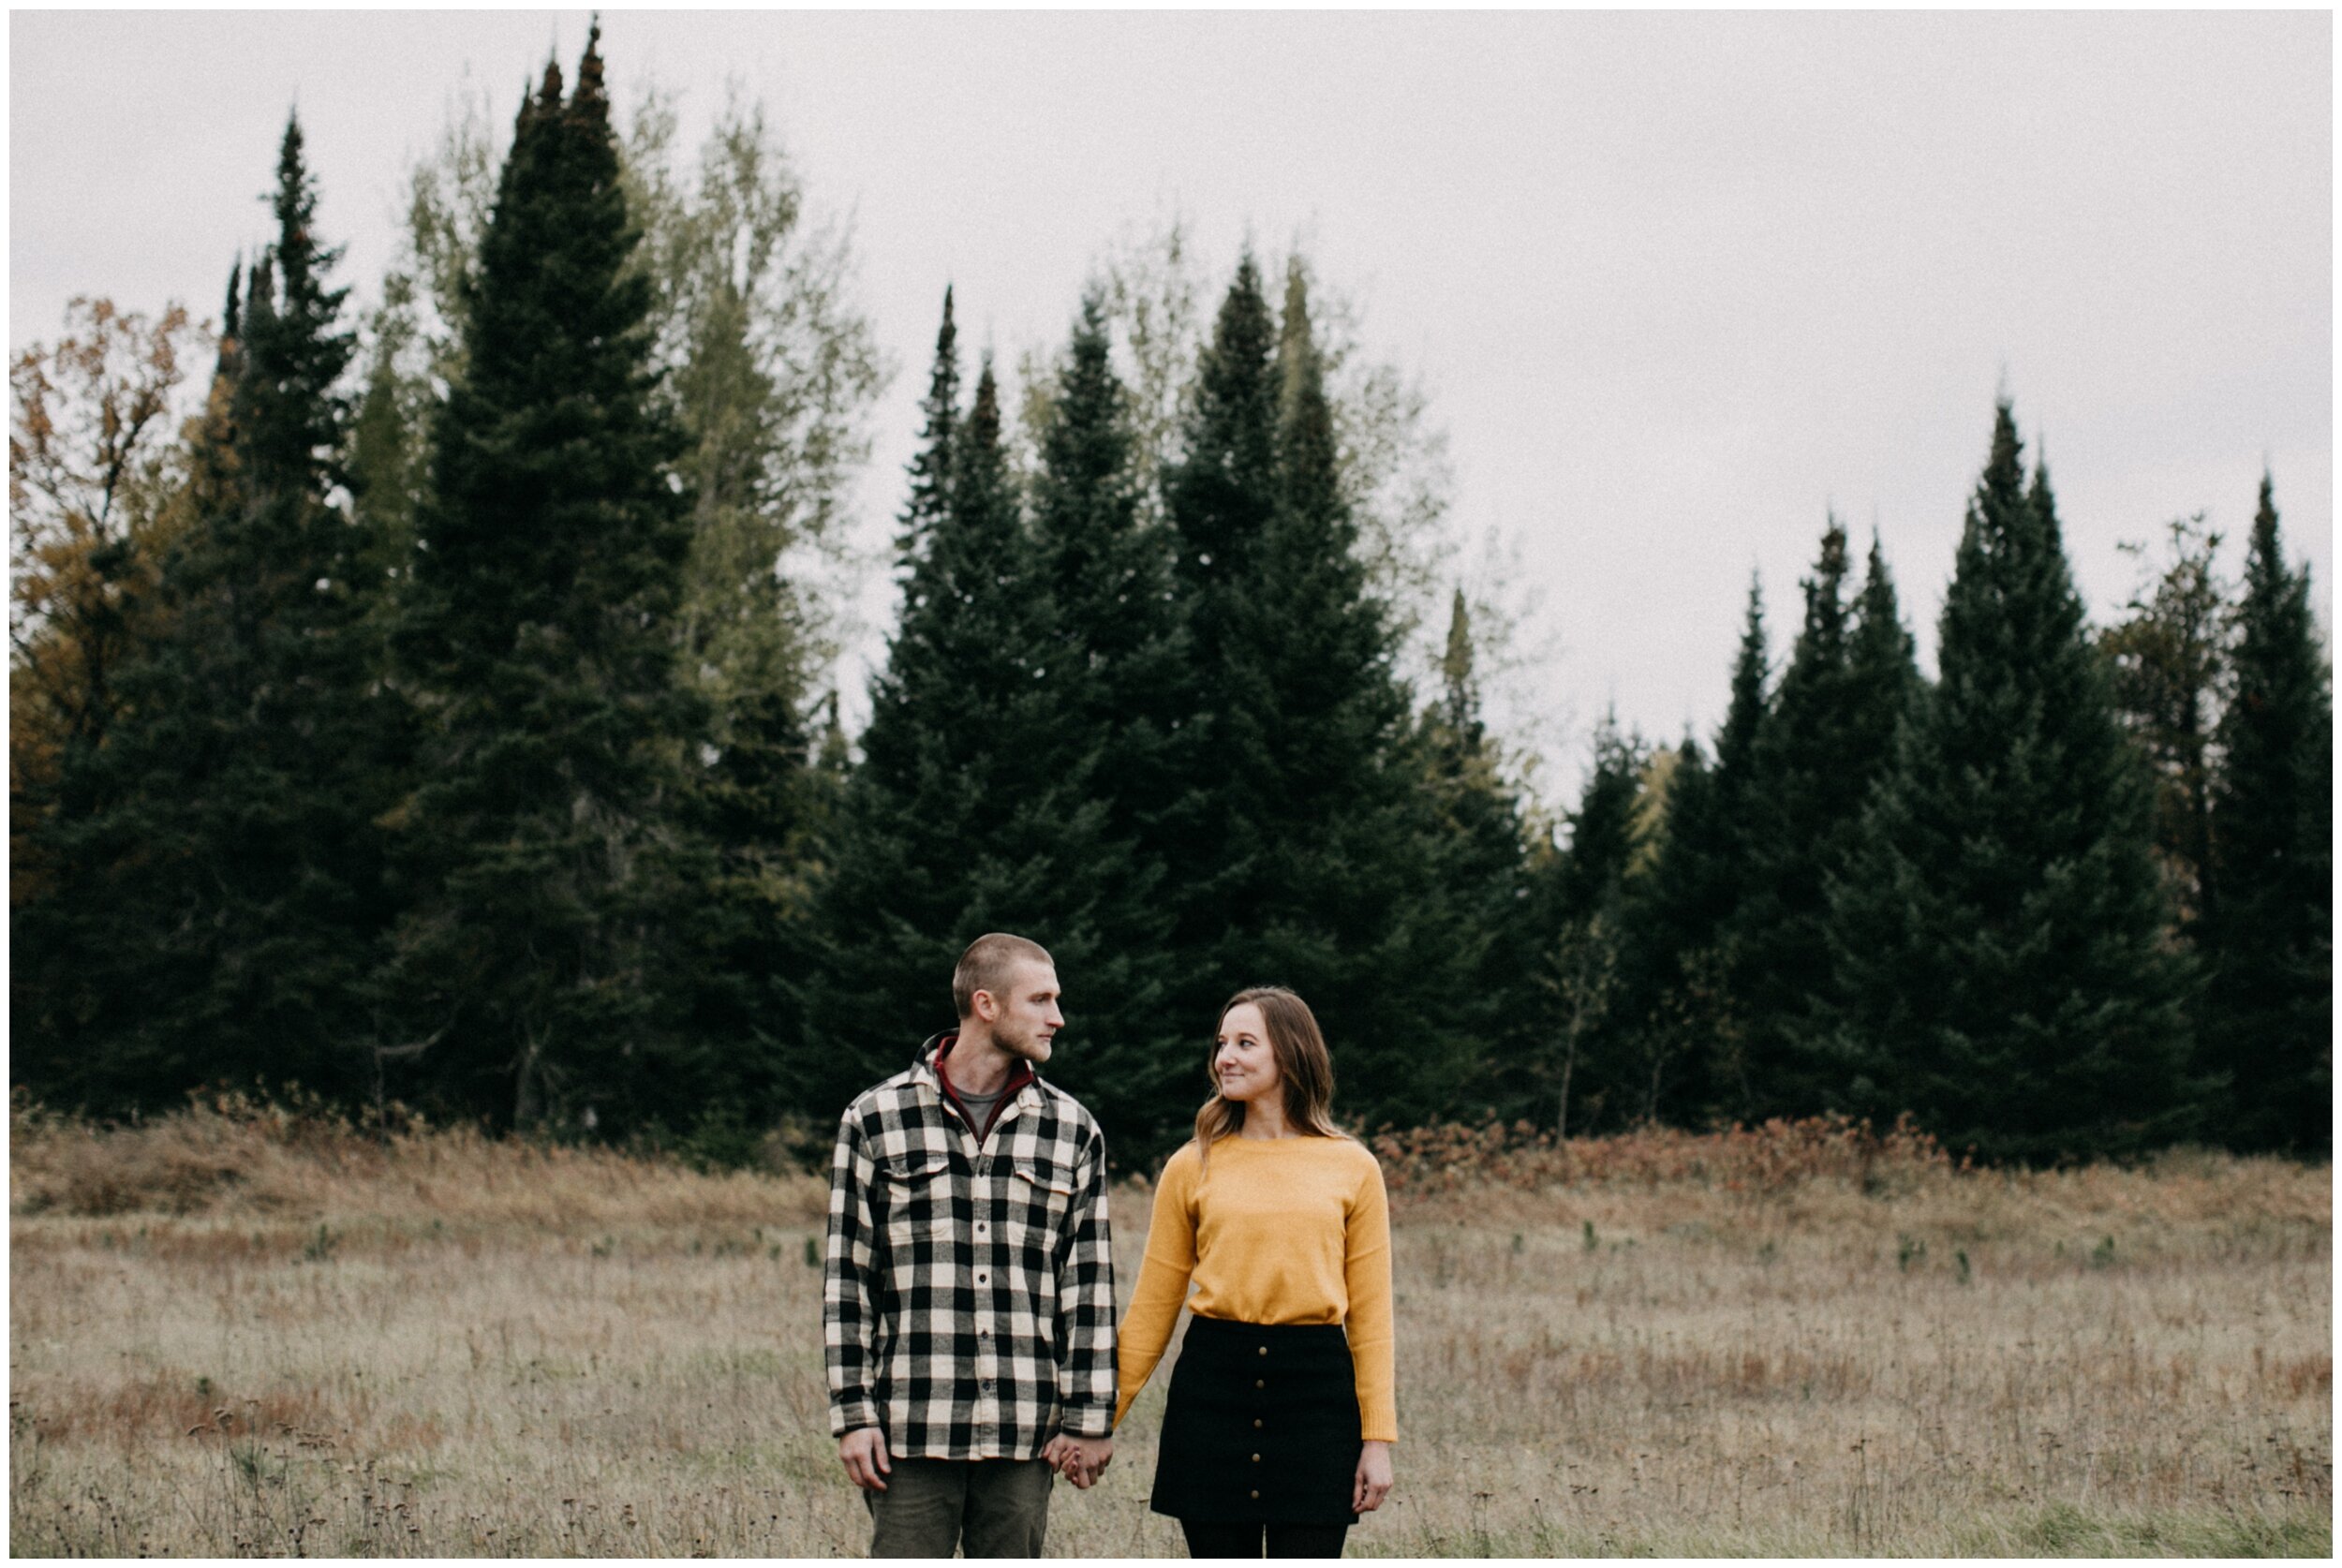 Northern Minnesota Pine tree forest October engagement